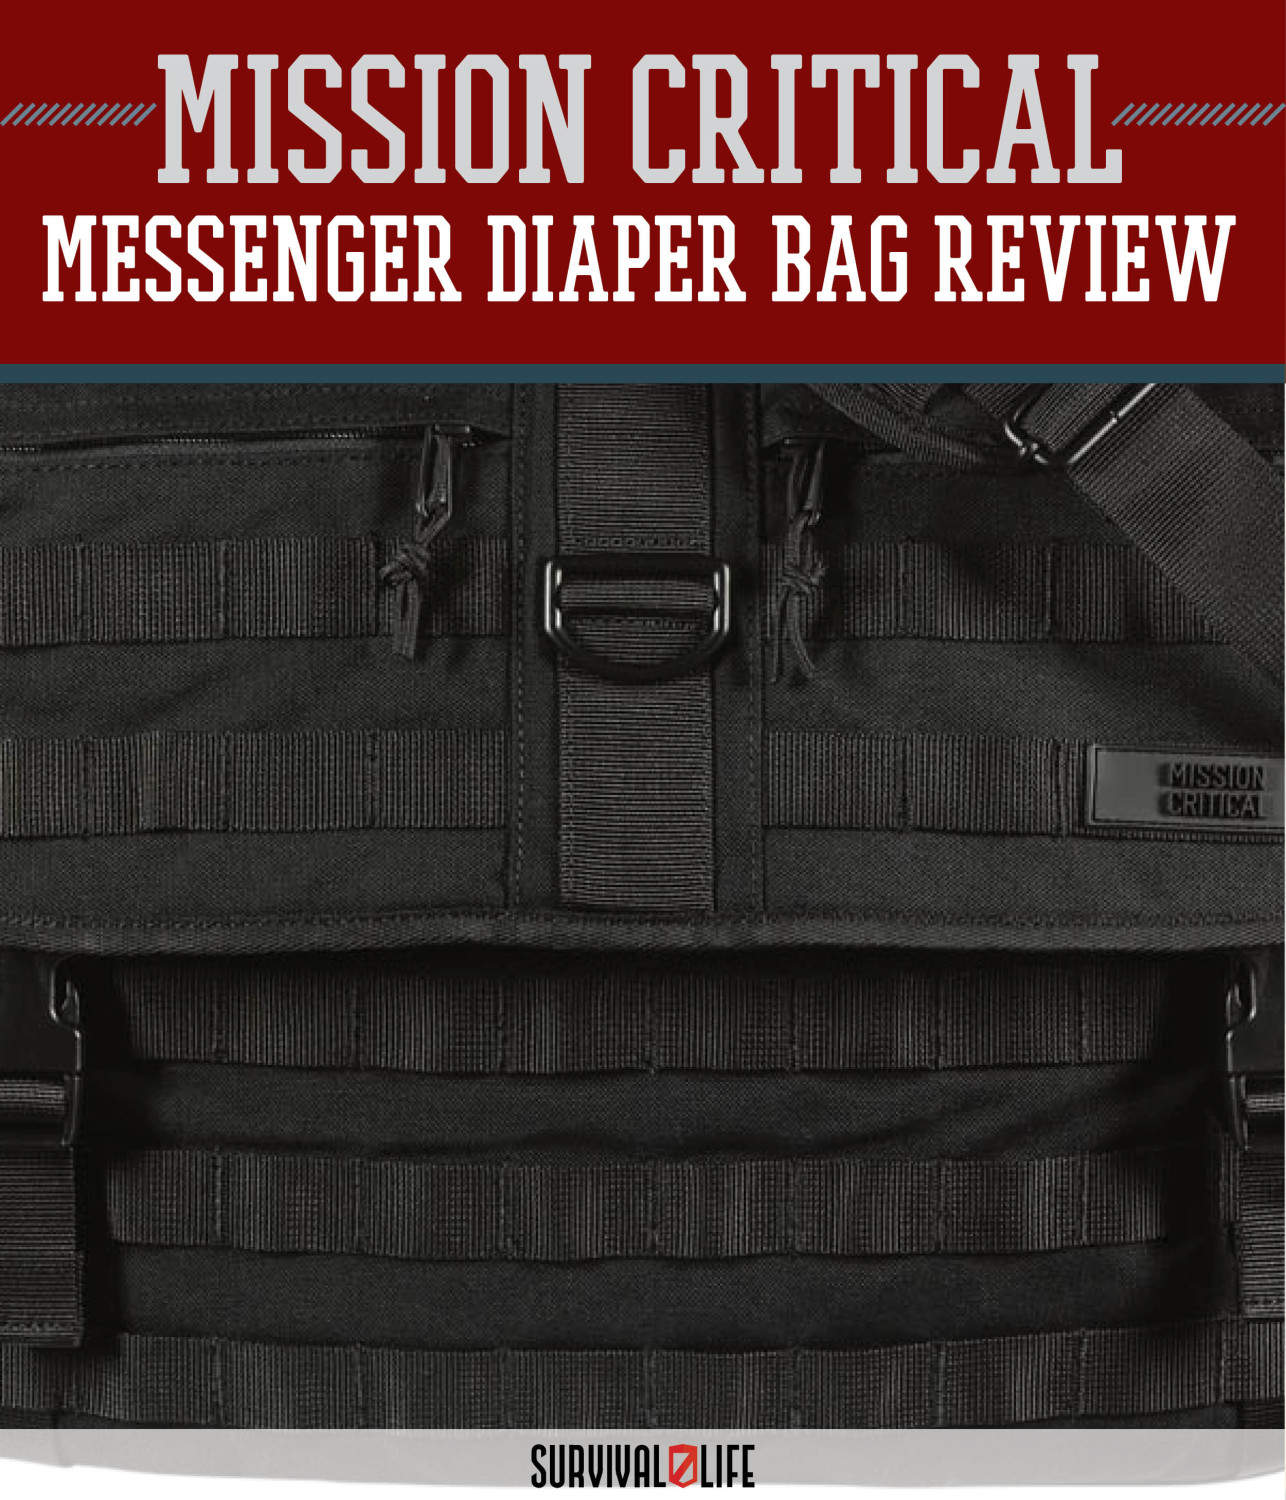 Survival Gear Review | The Mission Critical Messenger Diaper Bag by Survival Life at http://survivallife.com/2015/04/14/product-review-mission-critical-messenger-diaper-bag